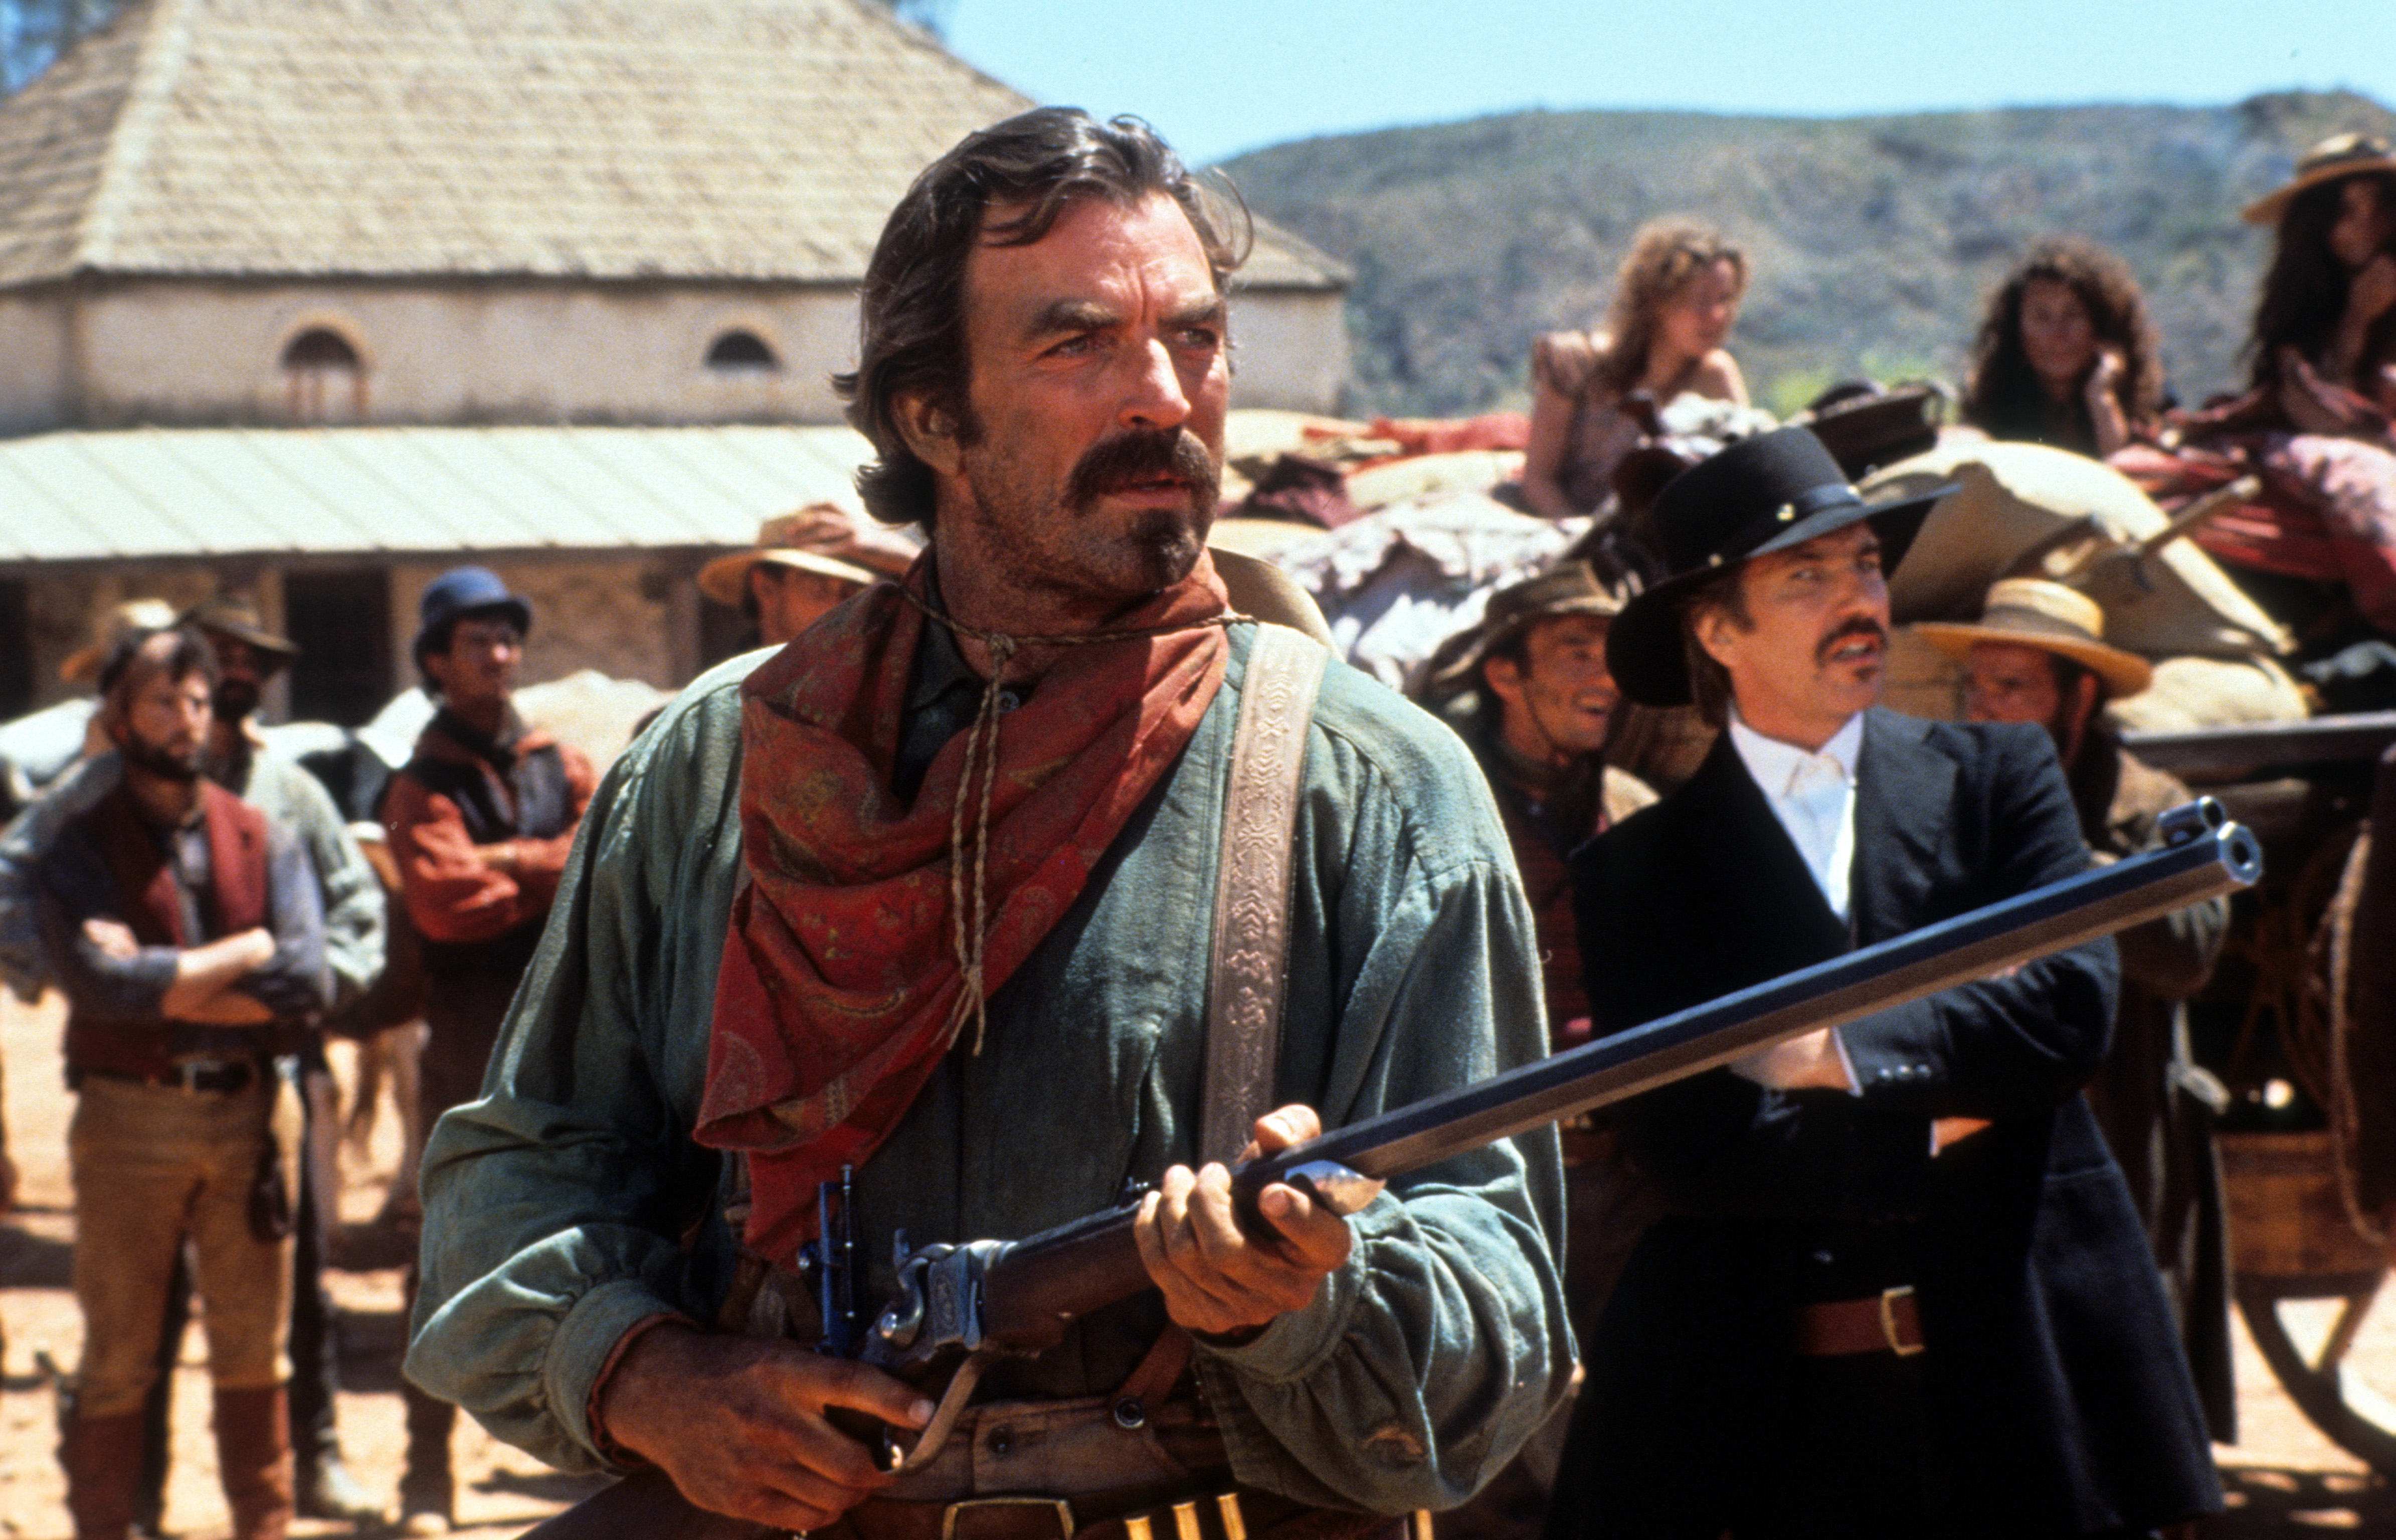 Tom Selleck holds a rifle in a scene from the film "Quigley Down Under" in 1990 | Source: Getty Images